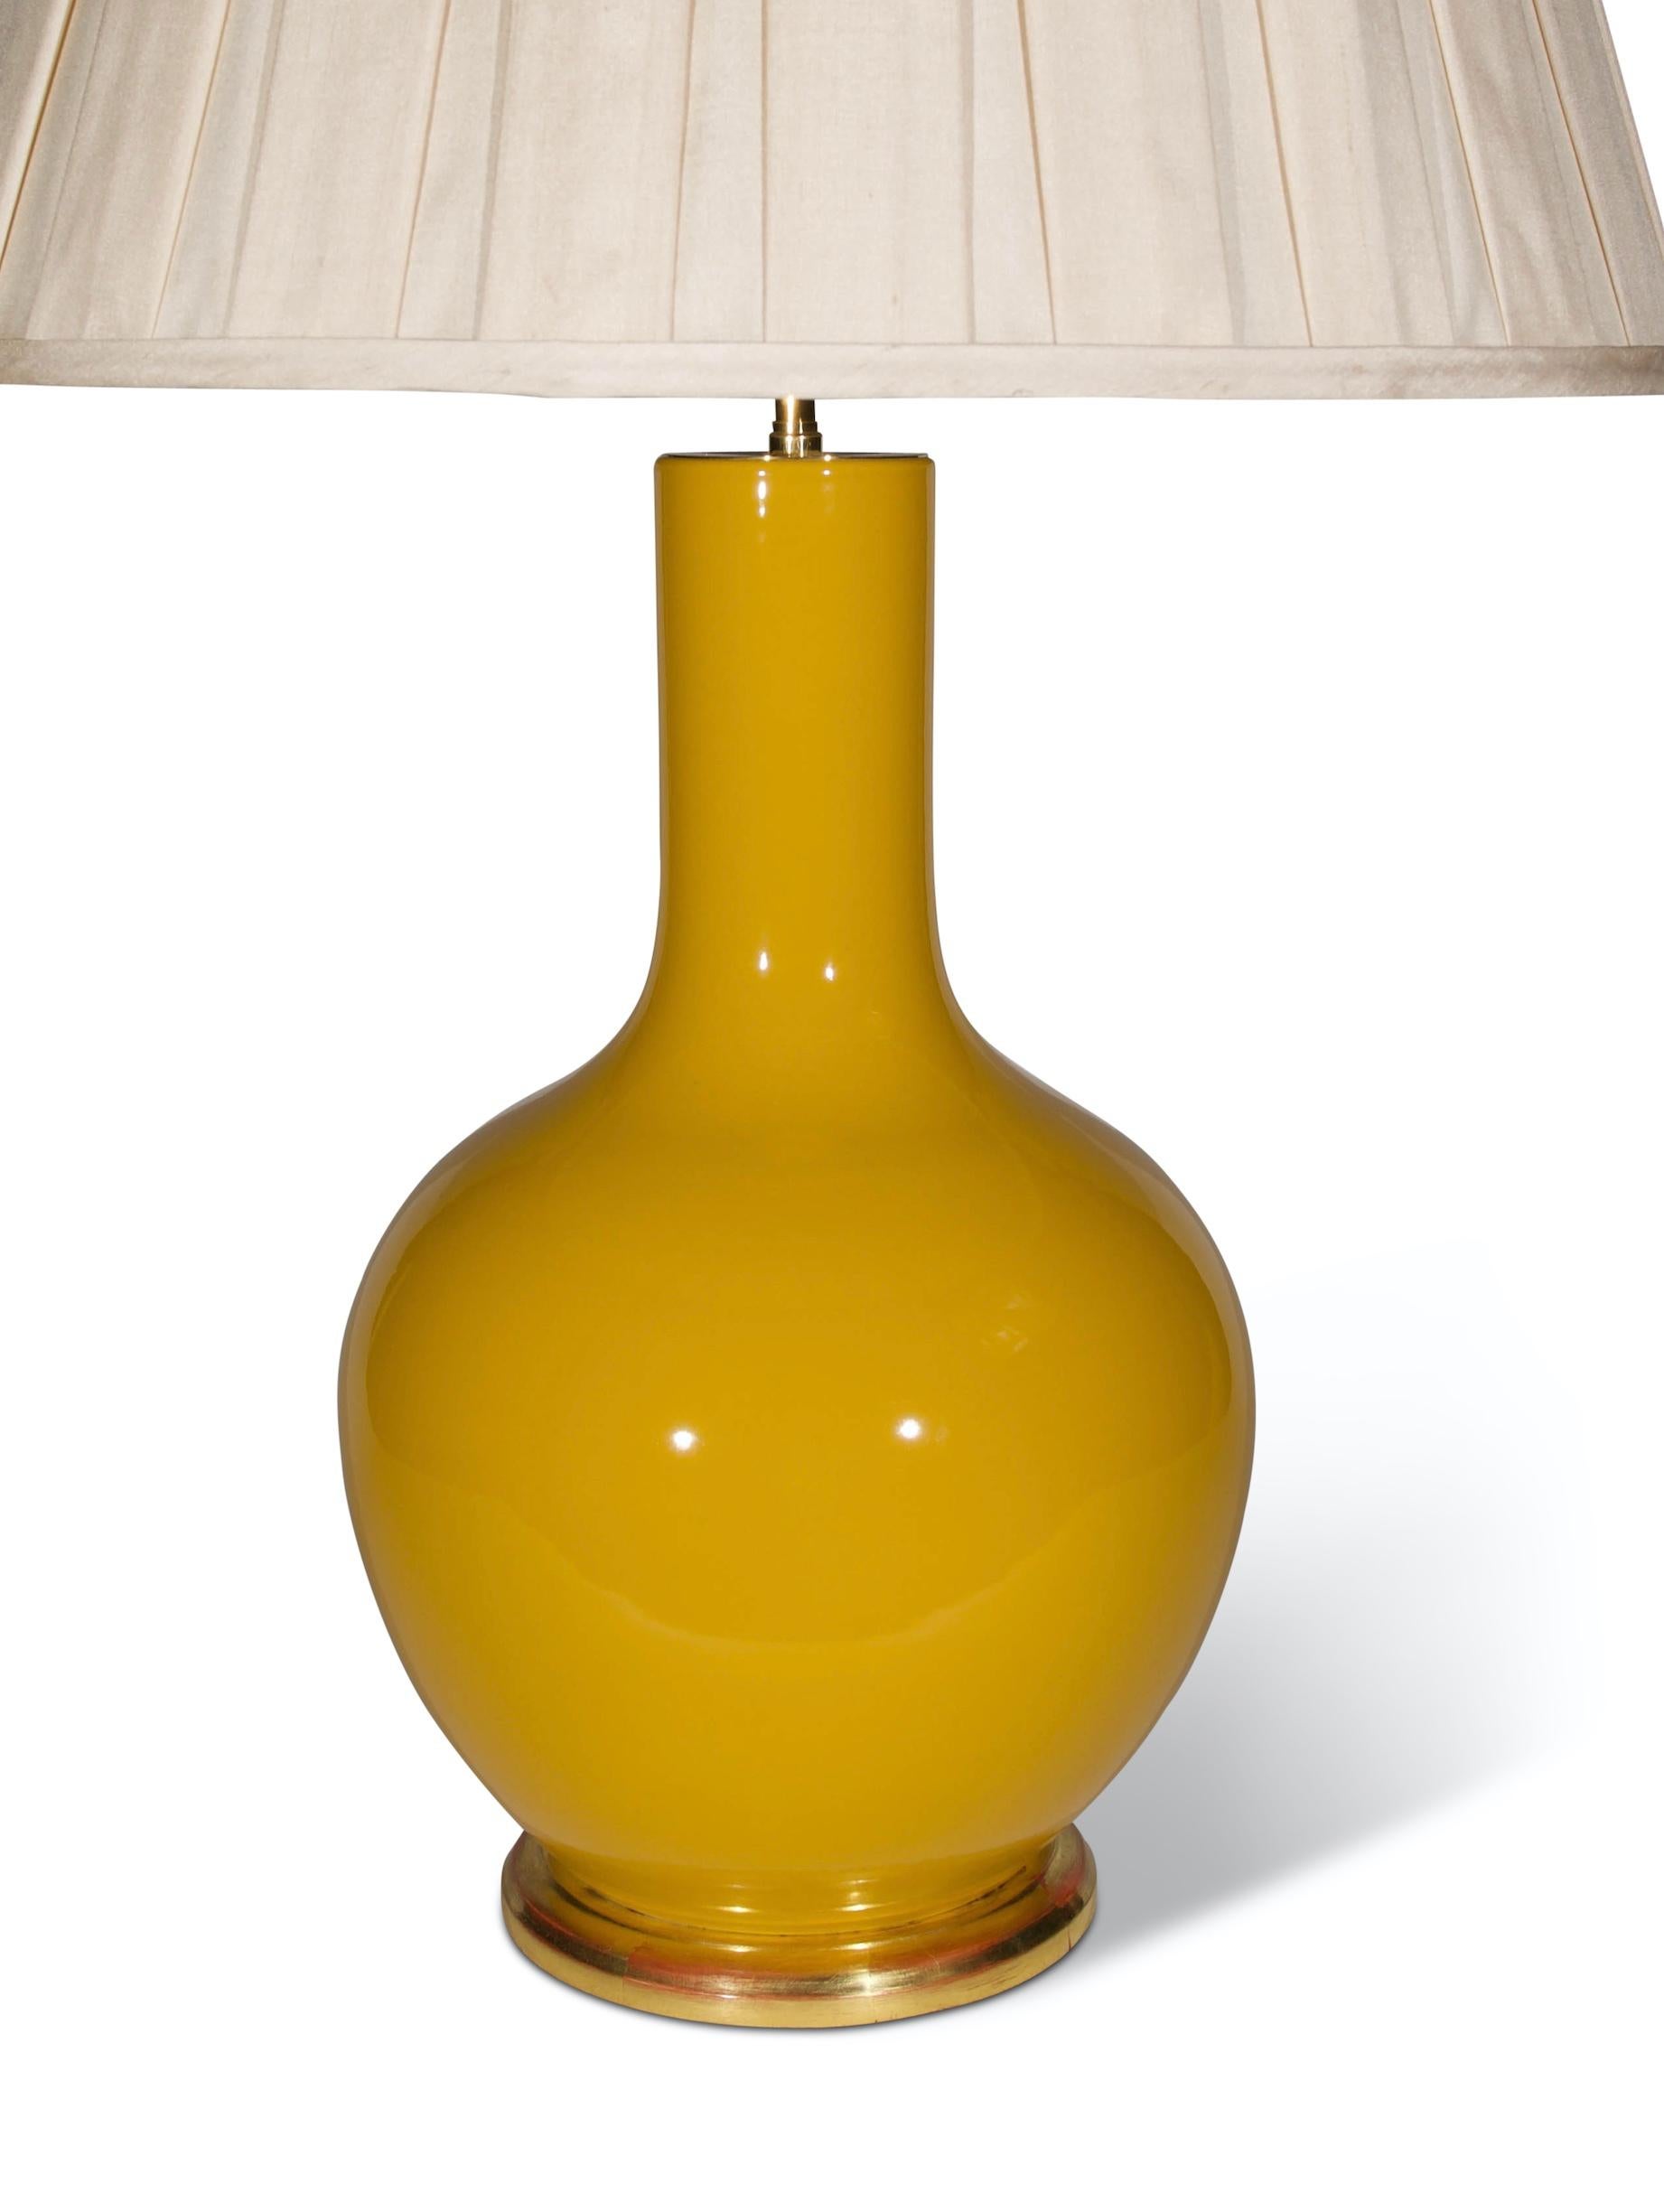 A fine Chinese porcelain Imperial Yellow glazed straight necked vase, now mounted as a lamp with a hand gilded turned base.

Height of vase: 16 1/2 in (42 cm) including giltwood bases, excluding electrical fitments and lampshade.

All of our lamps